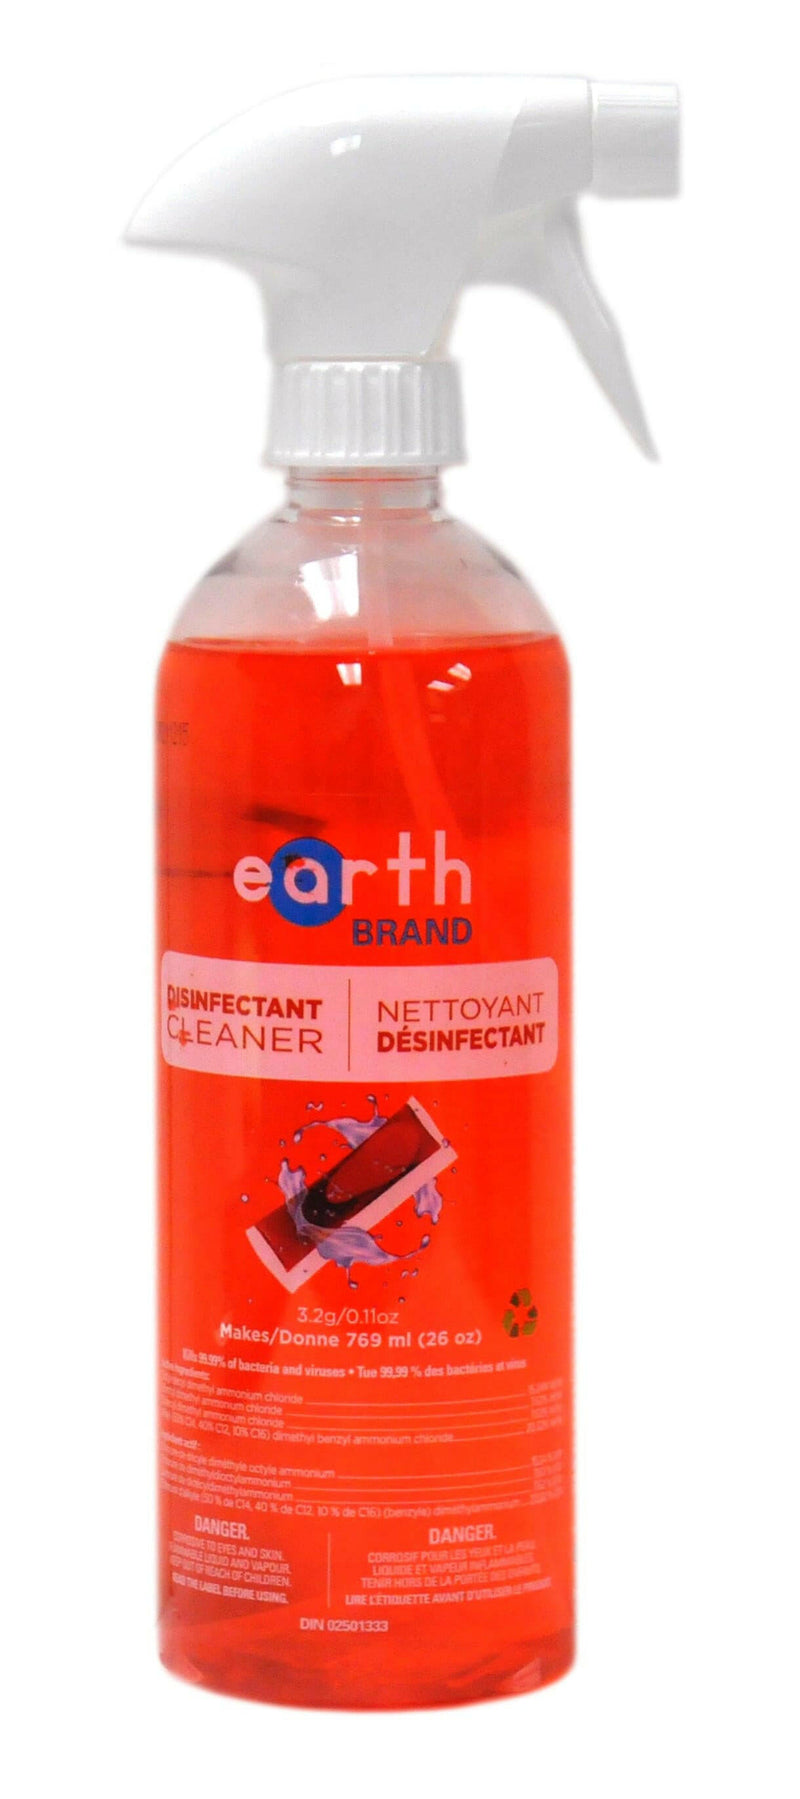 Earth Brand Dissolvable Pods - Disinfectant Cleaner.